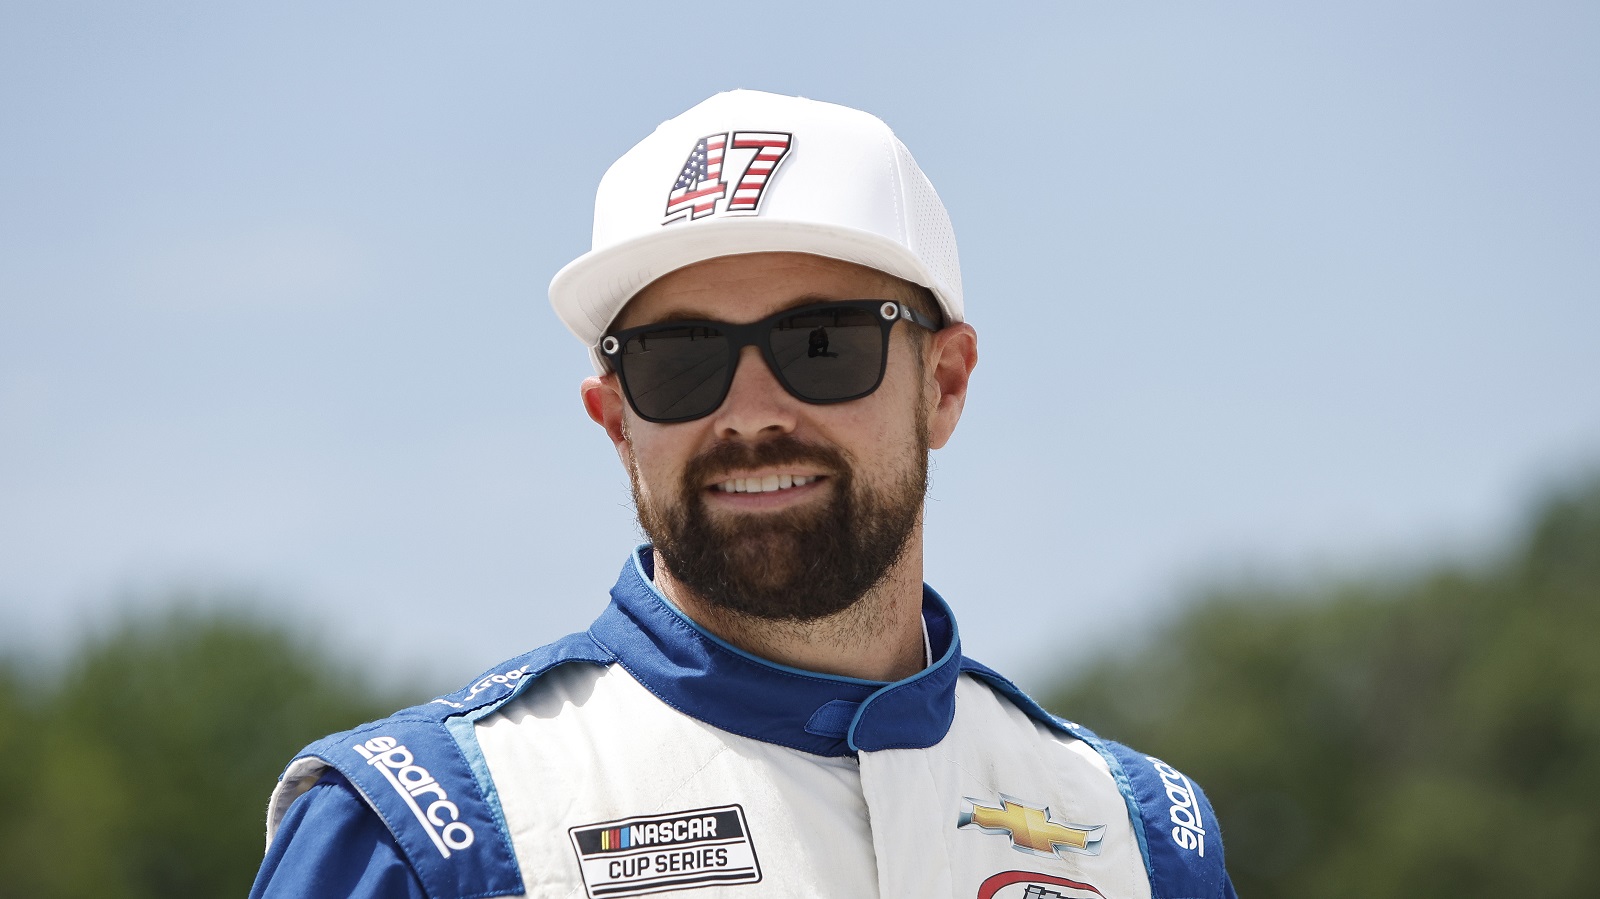 Ricky Stenhouse Jr. walks the grid prior to the NASCAR Cup Series Kwik Trip 250 at Road America on July 3, 2022 in Elkhart Lake, Wisconsin.